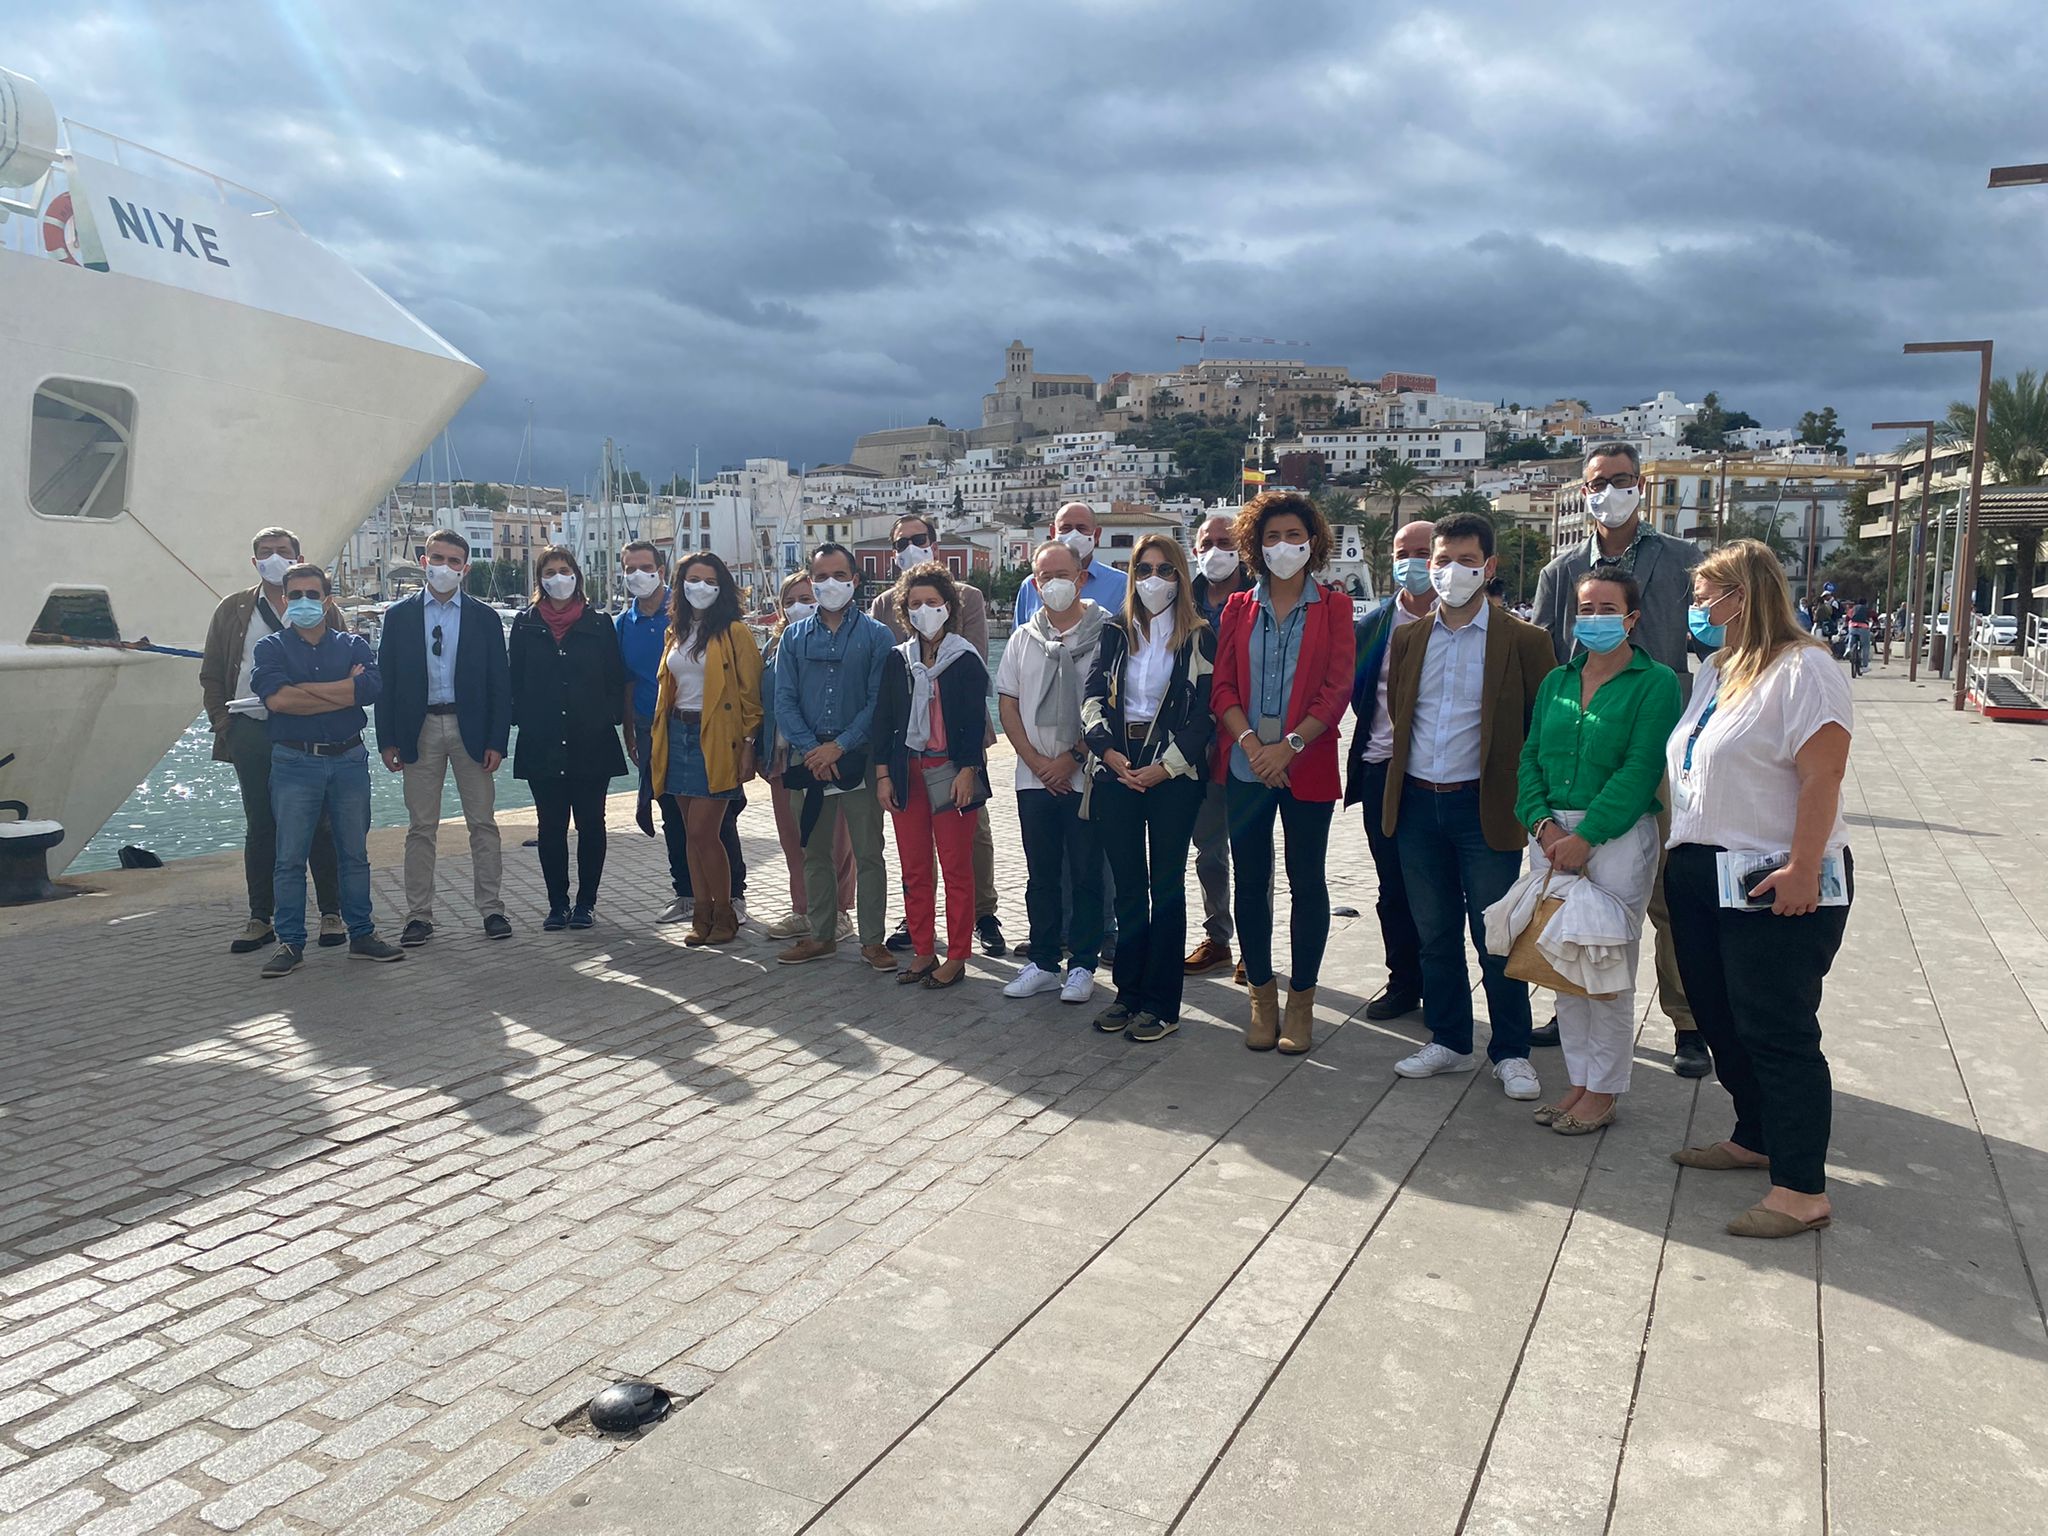 Students of the 10th Master's Degree in Port Management and Planning choose Eivissa and Formentera for their annual meeting